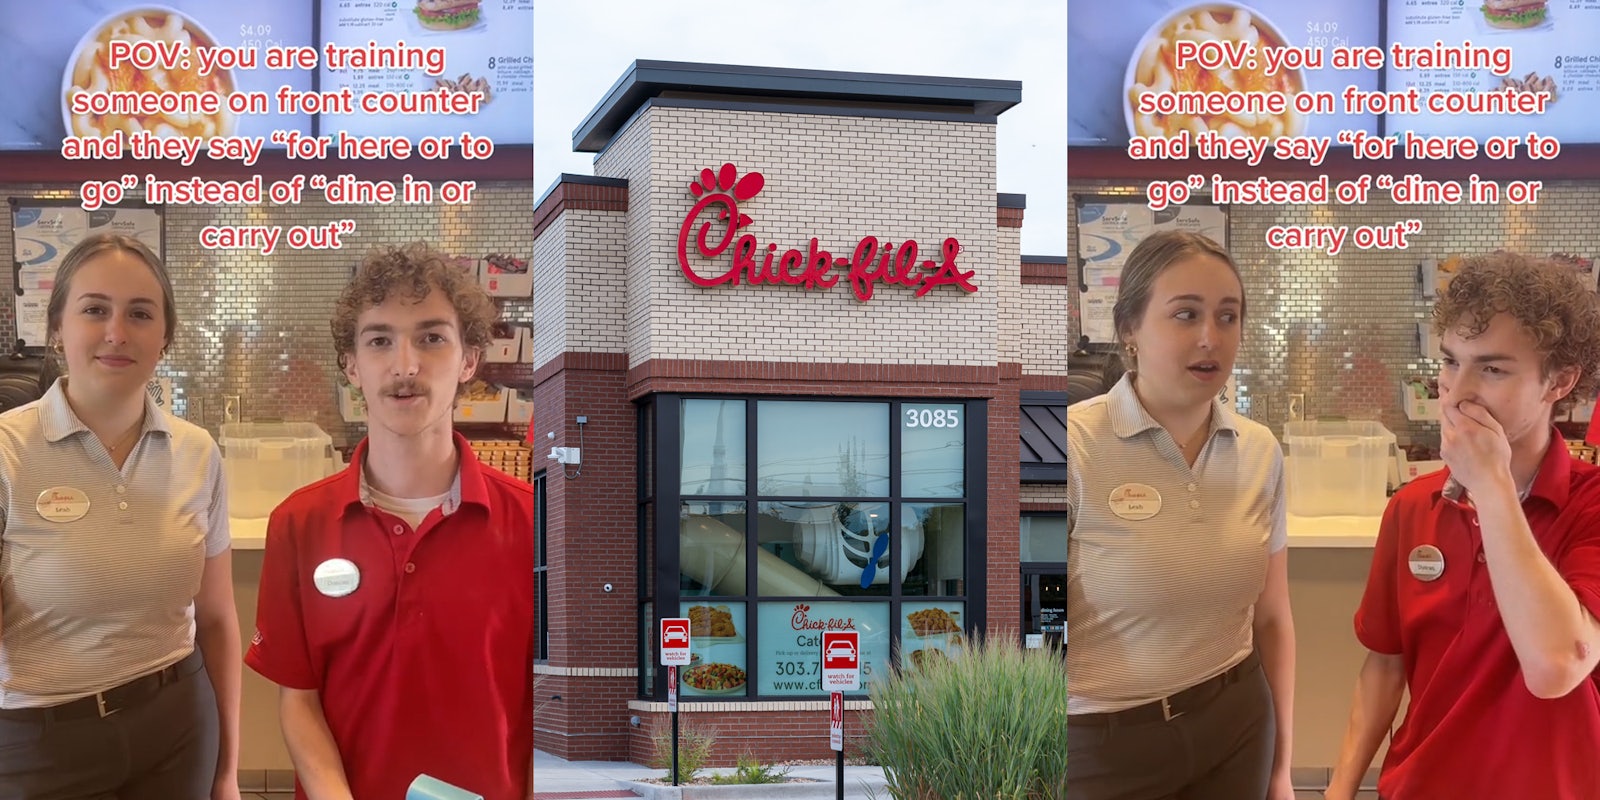 Chick-Fil-A employees with caption 'POV: you are training someone on front counter and they say 'for here or to go' instead of 'dine in or carry out' (l) Chick-Fil-A building with sign (c) Chick-Fil-A employees with caption 'POV: you are training someone on front counter and they say 'for here or to go' instead of 'dine in or carry out' (r)